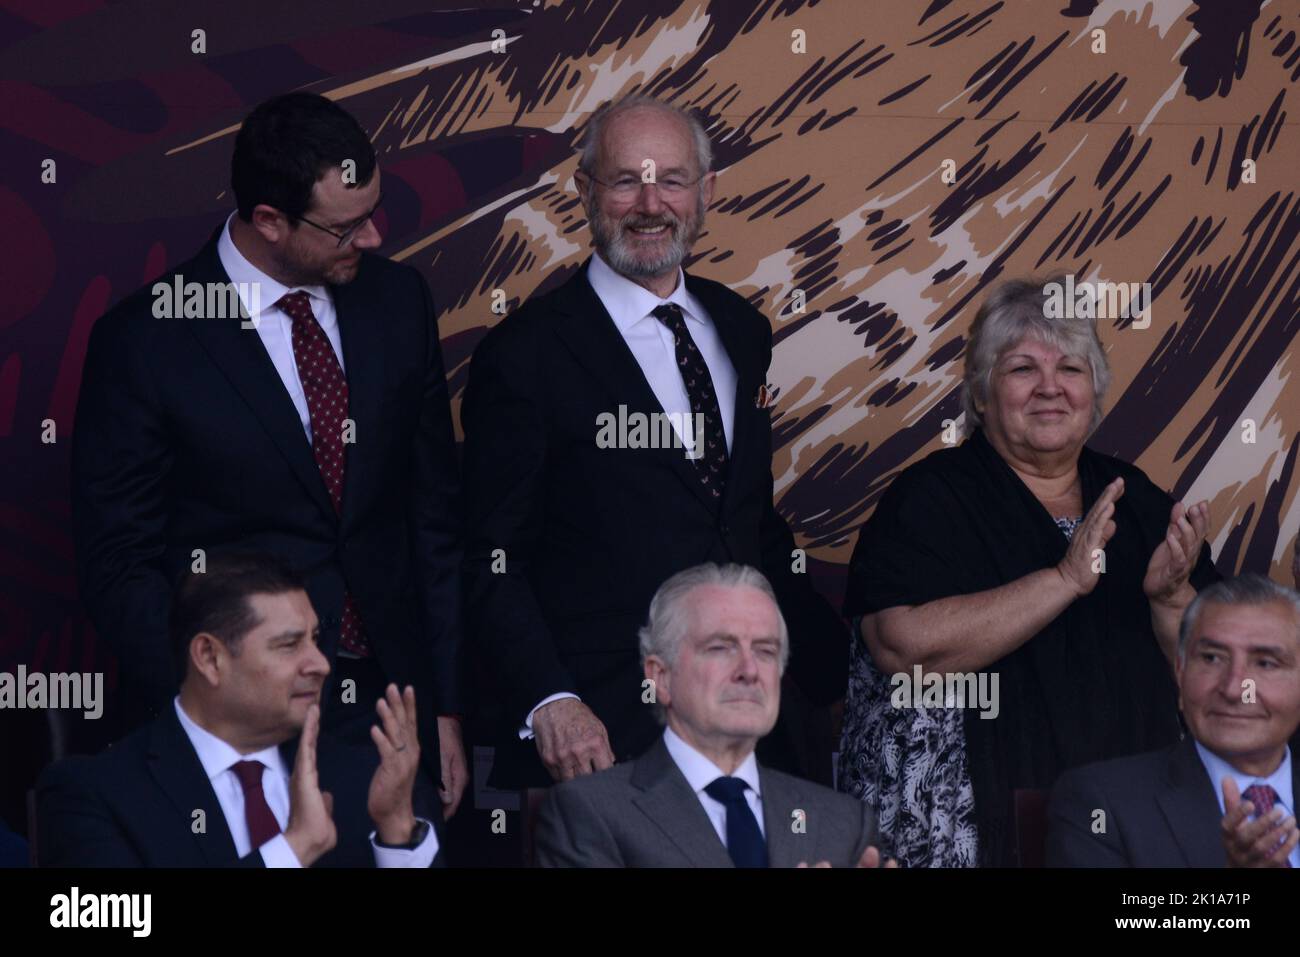 Mexico City, Mexico. 16th Sep, 2022. September 16, 2022, Mexico City, Mexico: John Shipton father of Julian Assange,  Gabriel Shipton brother of Julian Assange  and Aleida Guevara March, daughter of Ernesto 'Che' Guevara during the ceremony of the civic-military parade as part of the commemoration of the 212th Anniversary of the beginning of Mexico's Independence in the downtown. on September 16, 2022 in Mexico City, Mexico. (Photo by Carlos Tischler/ Eyepix Group) Credit: Eyepix Group/Alamy Live News Stock Photo